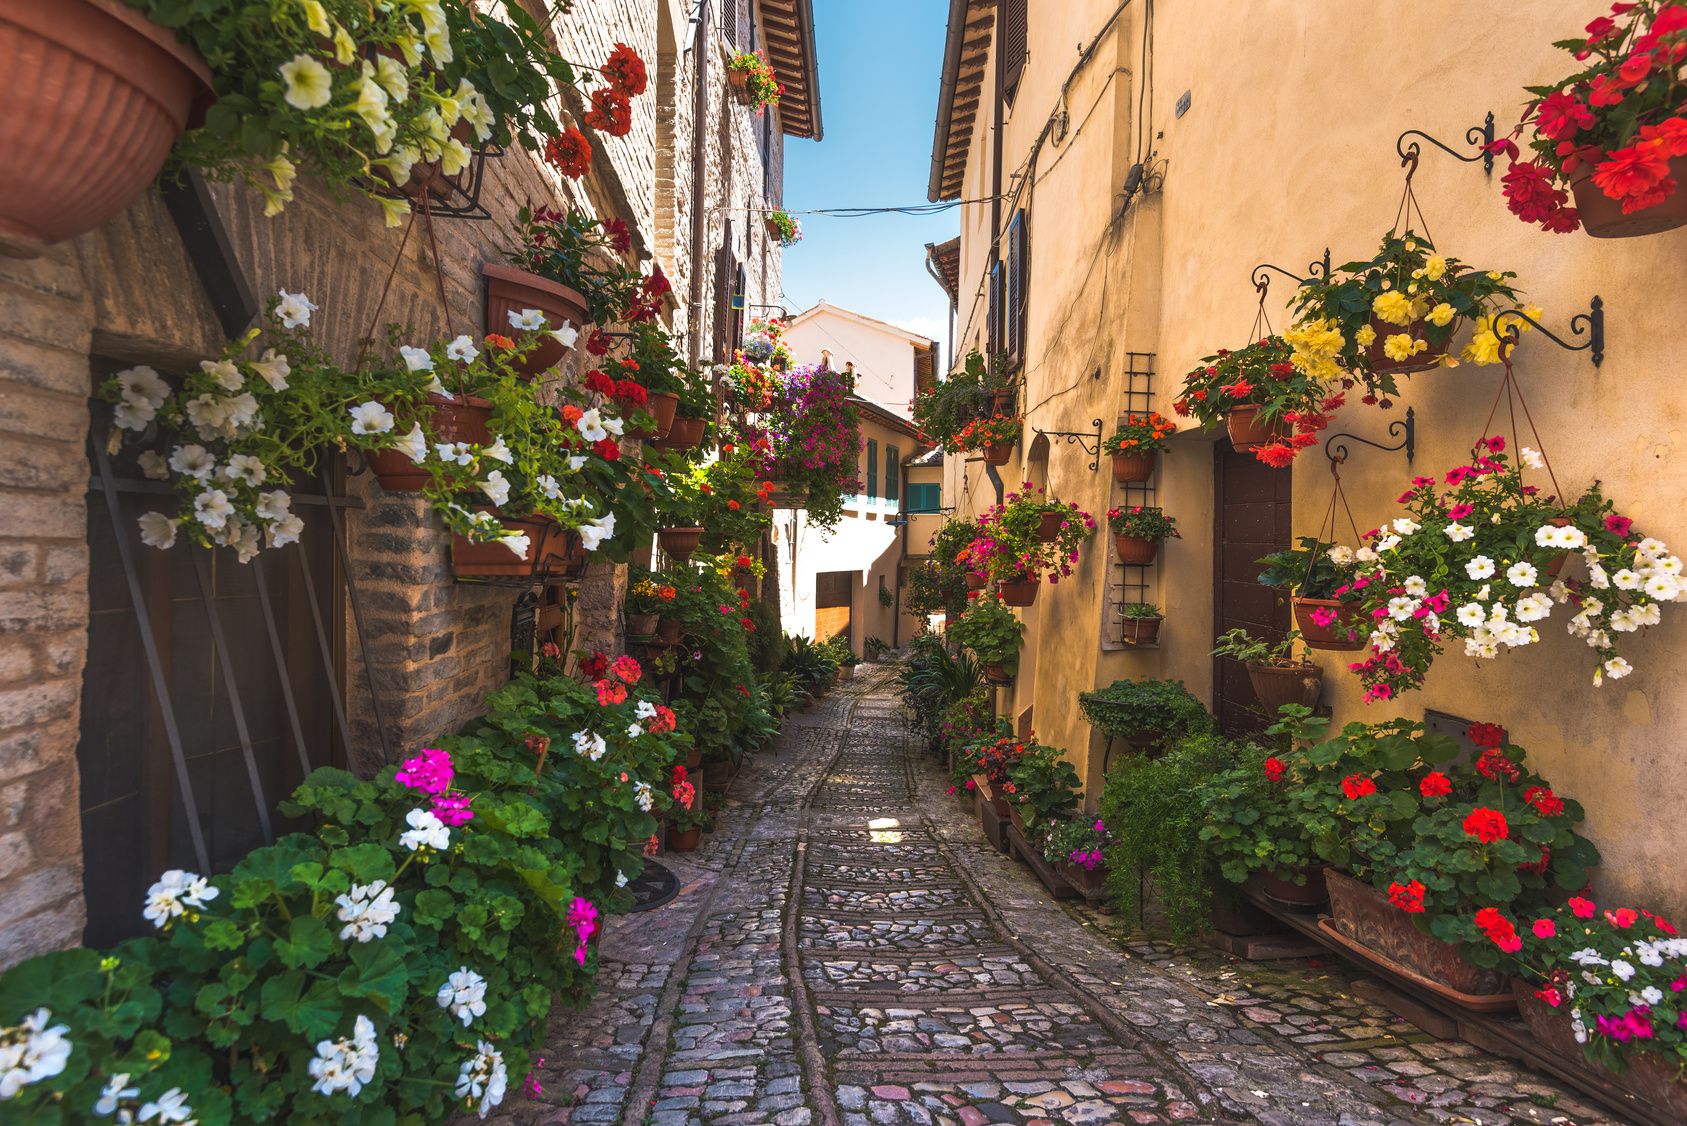 Floral street in central Italy, in the small Umbrian medieval town, Italy